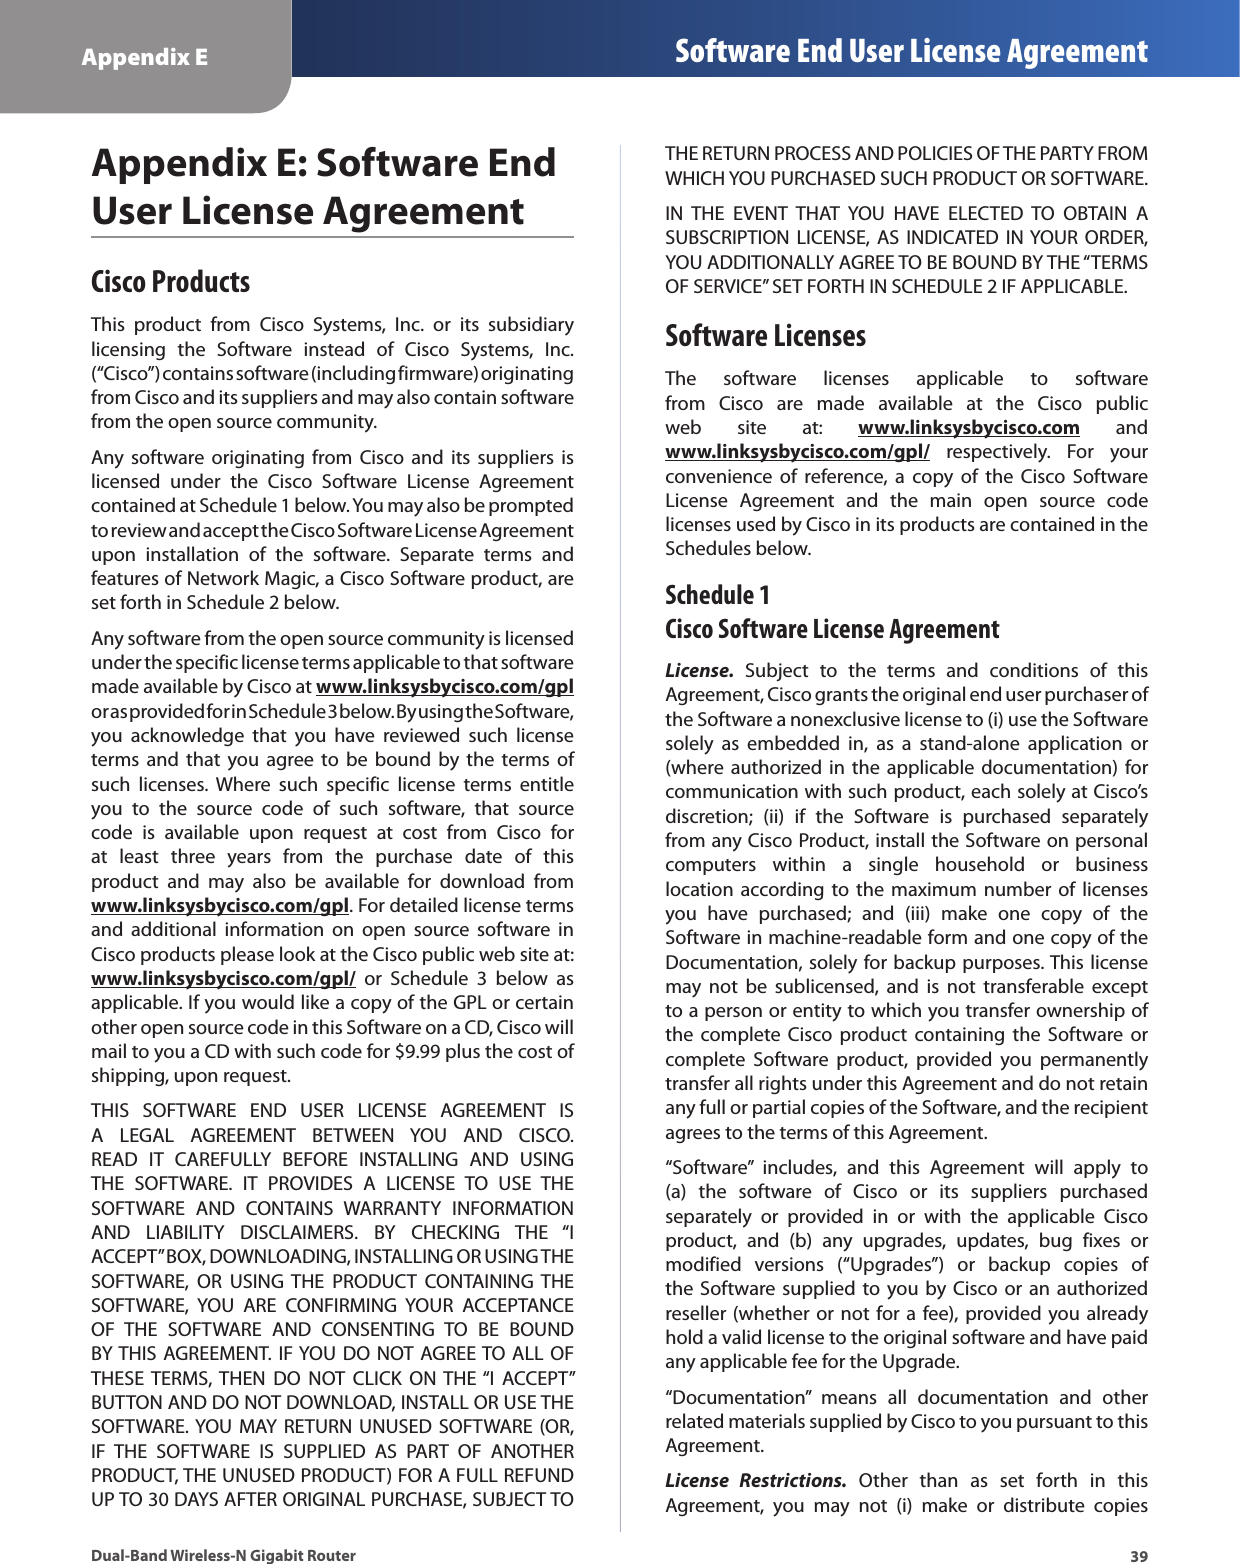 39Appendix E Software End User License AgreementDual-Band Wireless-N Gigabit RouterAppendix E: Software End User License AgreementCisco ProductsThis  product  from  Cisco  Systems,  Inc.  or  its  subsidiary licensing  the  Software  instead  of  Cisco  Systems,  Inc. (“Cisco”) contains software (including firmware) originating from Cisco and its suppliers and may also contain software from the open source community.Any software  originating from  Cisco and  its  suppliers  is licensed  under  the  Cisco  Software  License  Agreement contained at Schedule 1 below. You may also be prompted to review and accept the Cisco Software License Agreement upon  installation  of  the  software.  Separate  terms  and features of Network Magic, a Cisco Software product, are set forth in Schedule 2 below. Any software from the open source community is licensed under the specific license terms applicable to that software made available by Cisco at www.linksysbycisco.com/gpl or as provided for in Schedule 3 below. By using the Software, you  acknowledge  that  you  have  reviewed  such  license terms  and that  you  agree to  be bound  by the  terms of such  licenses.  Where  such  specific  license  terms  entitle you  to  the  source  code  of  such  software,  that  source code  is  available  upon  request  at  cost  from  Cisco  for at  least  three  years  from  the  purchase  date  of  this product  and  may  also  be  available  for  download  from www.linksysbycisco.com/gpl. For detailed license terms and  additional  information  on  open  source  software  in Cisco products please look at the Cisco public web site at: www.linksysbycisco.com/gpl/  or  Schedule  3  below  as applicable. If you would like a copy of the GPL or certain other open source code in this Software on a CD, Cisco will mail to you a CD with such code for $9.99 plus the cost of shipping, upon request.THIS  SOFTWARE  END  USER  LICENSE  AGREEMENT  IS A  LEGAL  AGREEMENT  BETWEEN  YOU  AND  CISCO. READ  IT  CAREFULLY  BEFORE  INSTALLING  AND  USING THE  SOFTWARE.  IT  PROVIDES  A  LICENSE  TO  USE  THE SOFTWARE  AND  CONTAINS  WARRANTY  INFORMATION AND  LIABILITY  DISCLAIMERS.  BY  CHECKING  THE  “I ACCEPT” BOX, DOWNLOADING, INSTALLING OR USING THE SOFTWARE,  OR  USING THE  PRODUCT  CONTAINING  THE SOFTWARE,  YOU  ARE  CONFIRMING  YOUR  ACCEPTANCE OF  THE  SOFTWARE  AND  CONSENTING  TO  BE  BOUND BY THIS AGREEMENT. IF YOU DO NOT AGREE TO ALL  OF THESE TERMS,  THEN  DO  NOT  CLICK  ON THE “I  ACCEPT” BUTTON AND DO NOT DOWNLOAD, INSTALL OR USE THE SOFTWARE. YOU  MAY  RETURN UNUSED  SOFTWARE  (OR, IF  THE  SOFTWARE  IS  SUPPLIED  AS  PART  OF  ANOTHER PRODUCT, THE UNUSED PRODUCT) FOR A FULL REFUND UP TO 30 DAYS AFTER ORIGINAL PURCHASE, SUBJECT TO THE RETURN PROCESS AND POLICIES OF THE PARTY FROM WHICH YOU PURCHASED SUCH PRODUCT OR SOFTWARE.IN  THE  EVENT  THAT  YOU  HAVE  ELECTED  TO  OBTAIN  A SUBSCRIPTION LICENSE,  AS INDICATED  IN YOUR ORDER, YOU ADDITIONALLY AGREE TO BE BOUND BY THE “TERMS OF SERVICE” SET FORTH IN SCHEDULE 2 IF APPLICABLE.Software LicensesThe  software  licenses  applicable  to  software from  Cisco  are  made  available  at  the  Cisco  public web  site  at:  www.linksysbycisco.com  and www.linksysbycisco.com/gpl/  respectively.  For  your convenience  of  reference,  a  copy  of  the  Cisco  Software License  Agreement  and  the  main  open  source  code licenses used by Cisco in its products are contained in the Schedules below.Schedule 1 Cisco Software License AgreementLicense.  Subject  to  the  terms  and  conditions  of  this Agreement, Cisco grants the original end user purchaser of the Software a nonexclusive license to (i) use the Software solely  as  embedded  in,  as  a  stand-alone  application  or (where authorized in  the applicable documentation) for communication with such product, each solely at Cisco’s discretion;  (ii)  if  the  Software  is  purchased  separately from any Cisco Product, install the Software on personal computers  within  a  single  household  or  business location according to  the  maximum number  of licenses you  have  purchased;  and  (iii)  make  one  copy  of  the Software in machine-readable form and one copy of the Documentation, solely for backup purposes. This license may  not  be  sublicensed,  and  is  not  transferable  except to a person or entity to which you transfer ownership of the  complete  Cisco product  containing  the Software  or complete  Software  product,  provided  you  permanently transfer all rights under this Agreement and do not retain any full or partial copies of the Software, and the recipient agrees to the terms of this Agreement. “Software”  includes,  and  this  Agreement  will  apply  to (a)  the  software  of  Cisco  or  its  suppliers  purchased separately  or  provided  in  or  with  the  applicable  Cisco product,  and  (b)  any  upgrades,  updates,  bug  fixes  or modified  versions  (“Upgrades”)  or  backup  copies  of the Software supplied  to  you  by  Cisco  or  an authorized reseller (whether or not for a fee), provided you already hold a valid license to the original software and have paid any applicable fee for the Upgrade. “Documentation”  means  all  documentation  and  other related materials supplied by Cisco to you pursuant to this Agreement.License  Restrictions.  Other  than  as  set  forth  in  this Agreement,  you  may  not  (i)  make  or  distribute  copies 